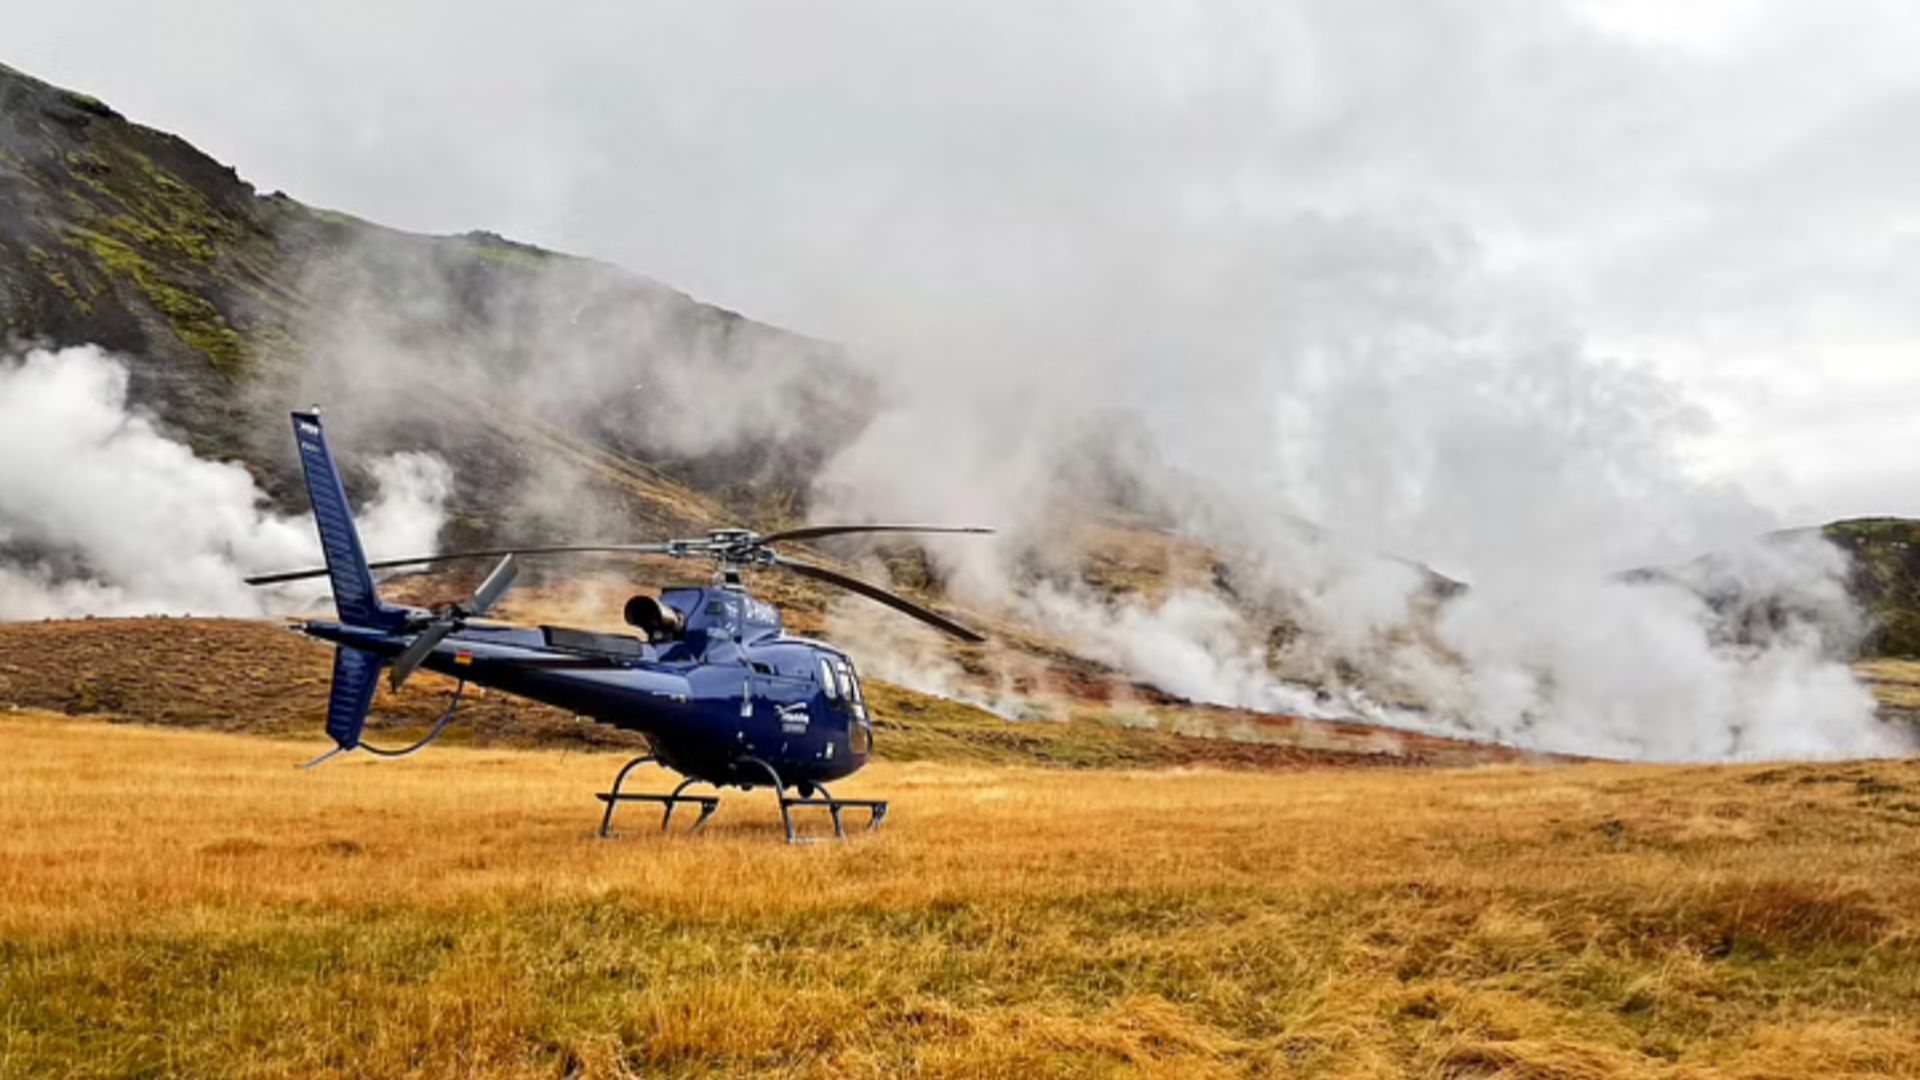 Hengill geothermal area and the helicopter in Iceland